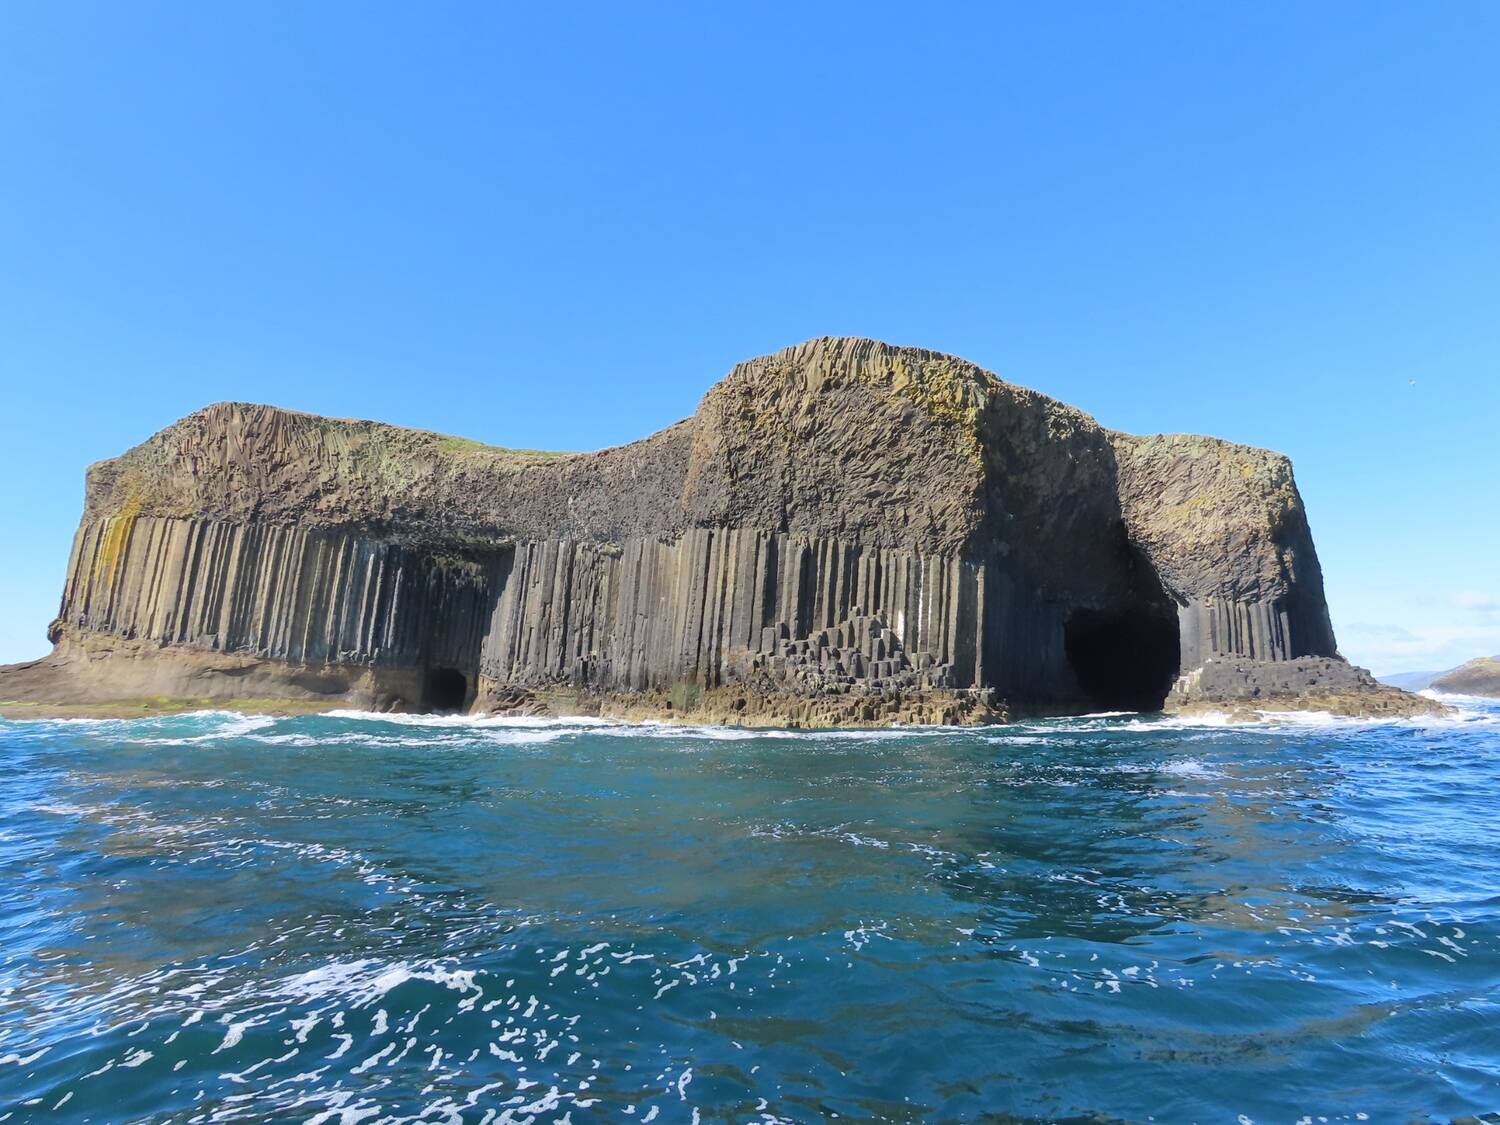 The Isle of Staffa seen from the sea on a very sunny day. The camera looks towards the basalt columns surrounding Fingal's Cave.